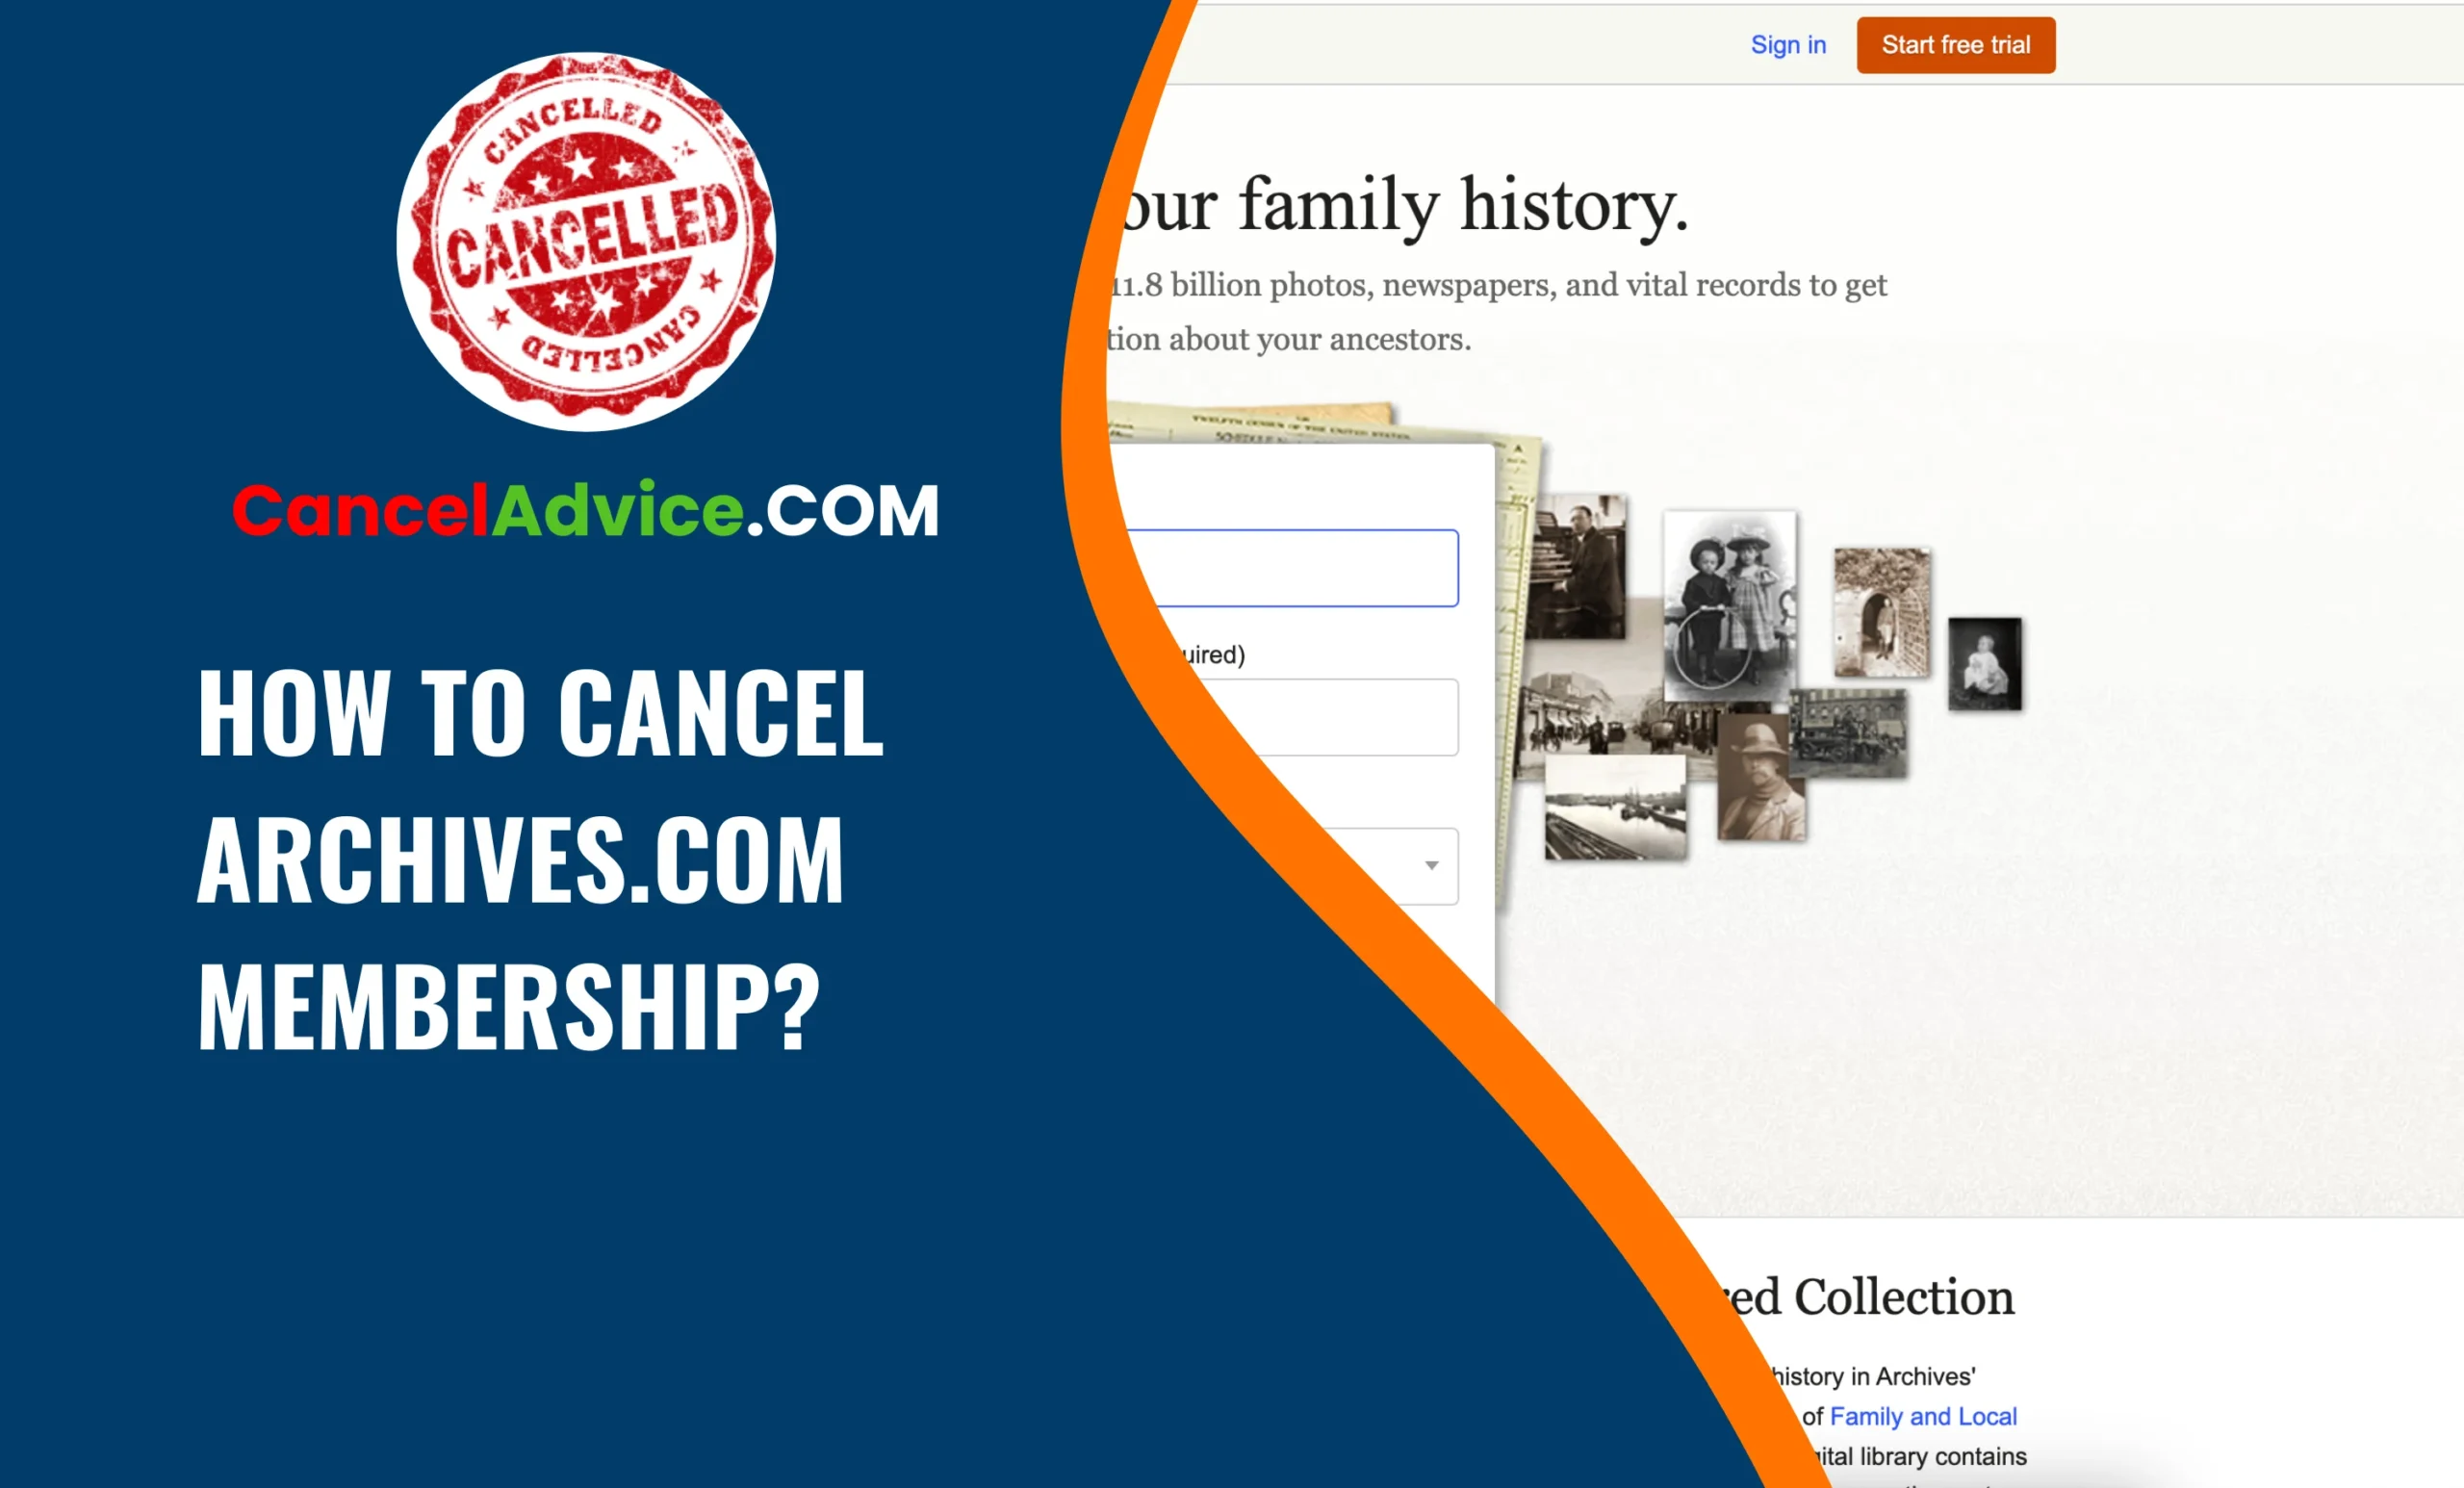 how to cancel archives.com membership